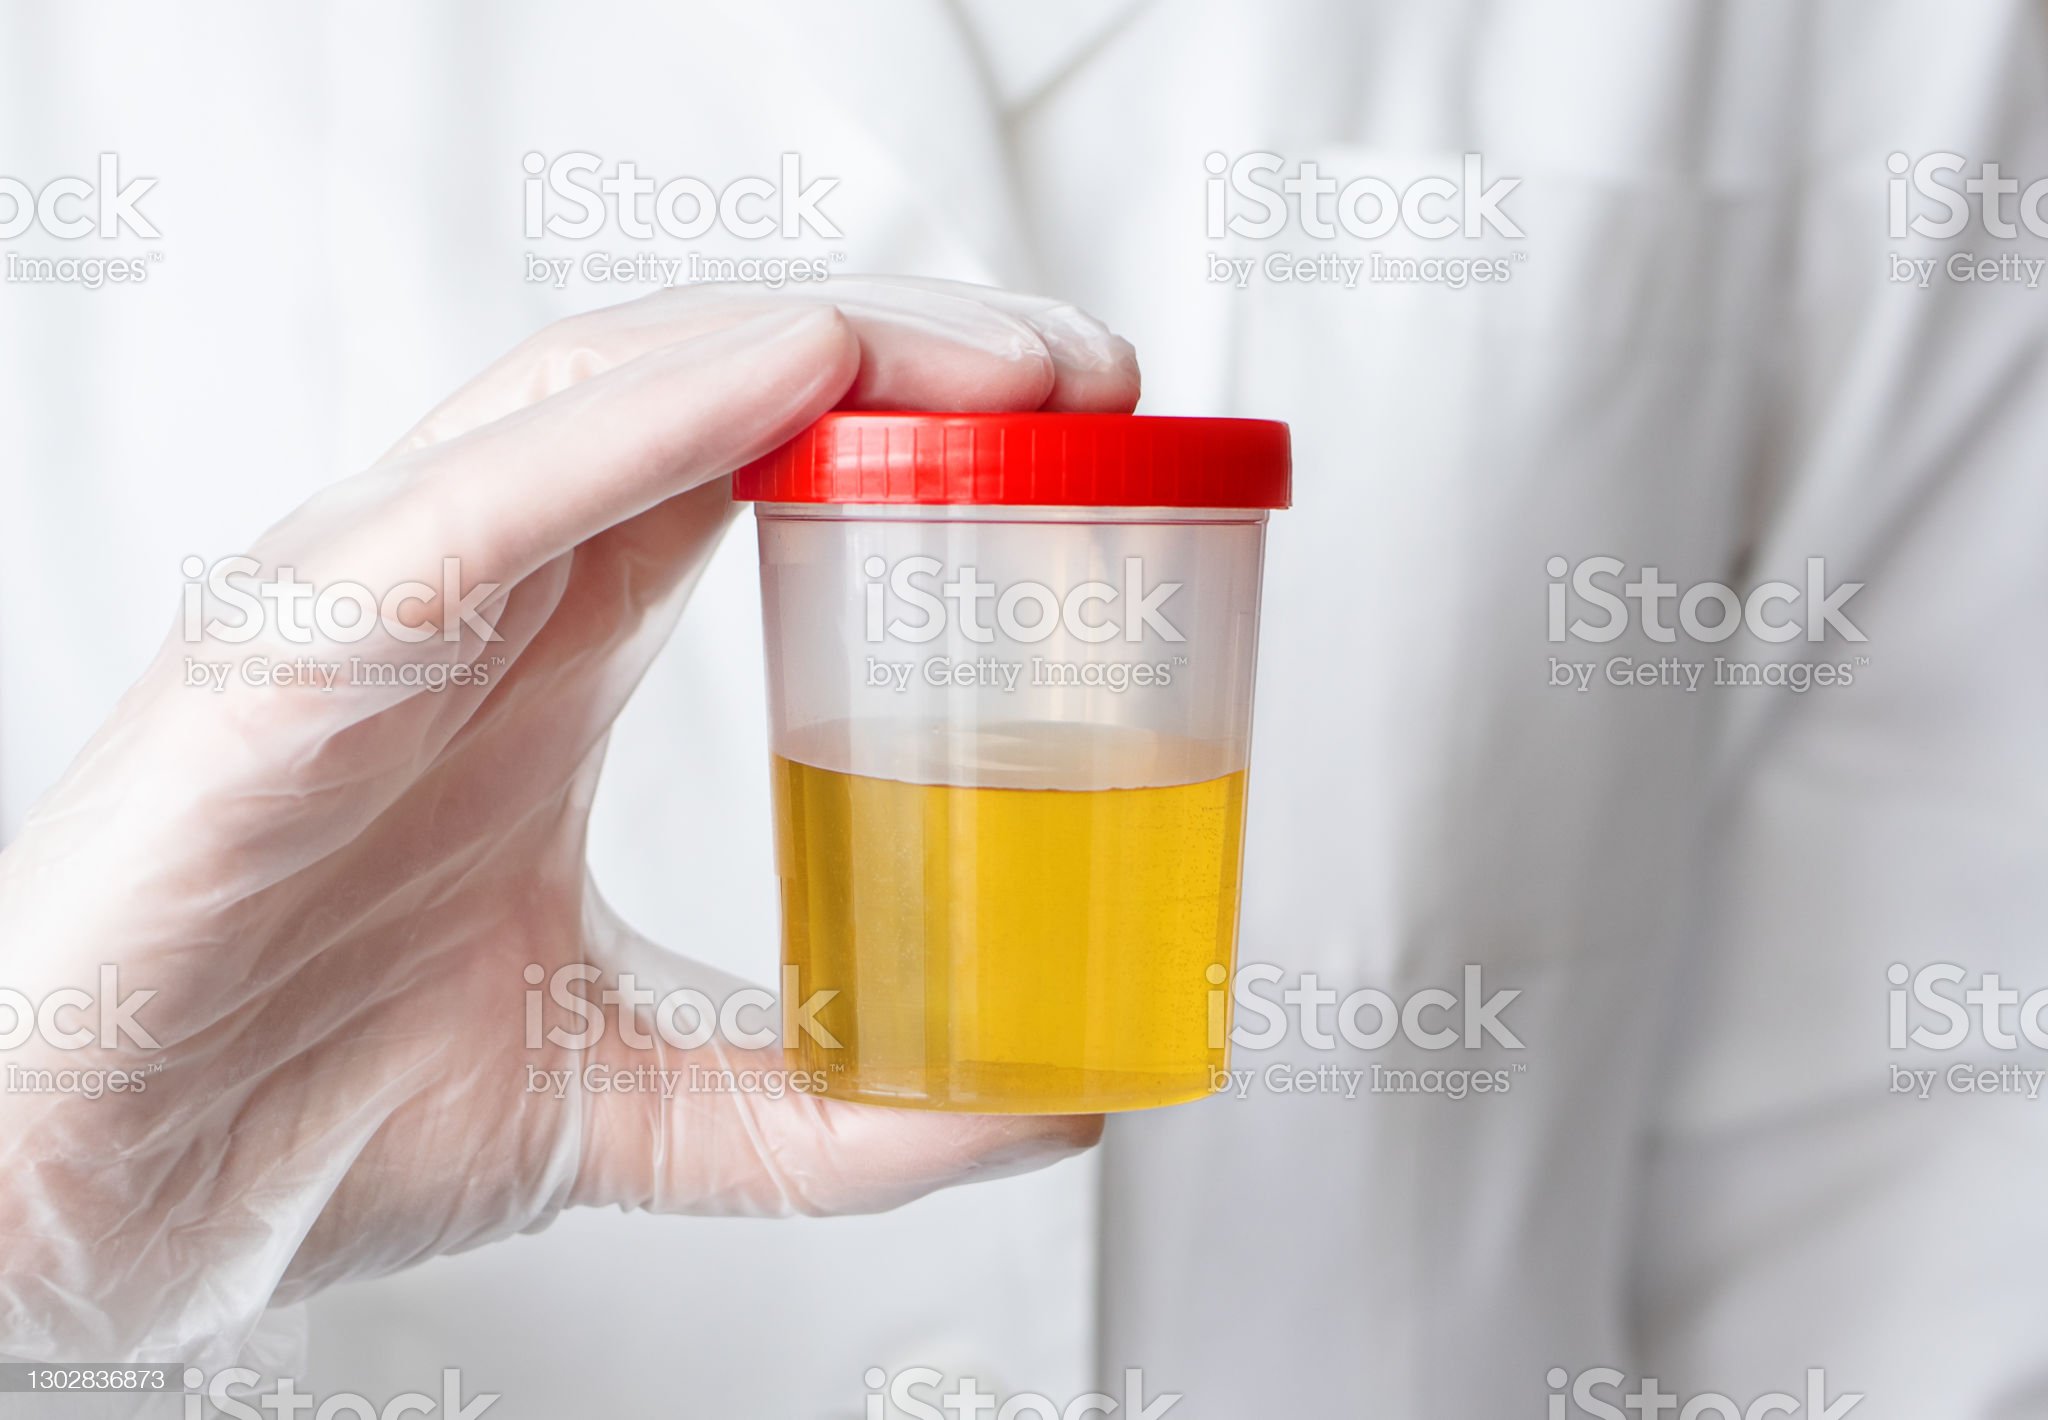 The doctor holds a can of urine analysis in his hand. Urine sample for exam. Selective focus.